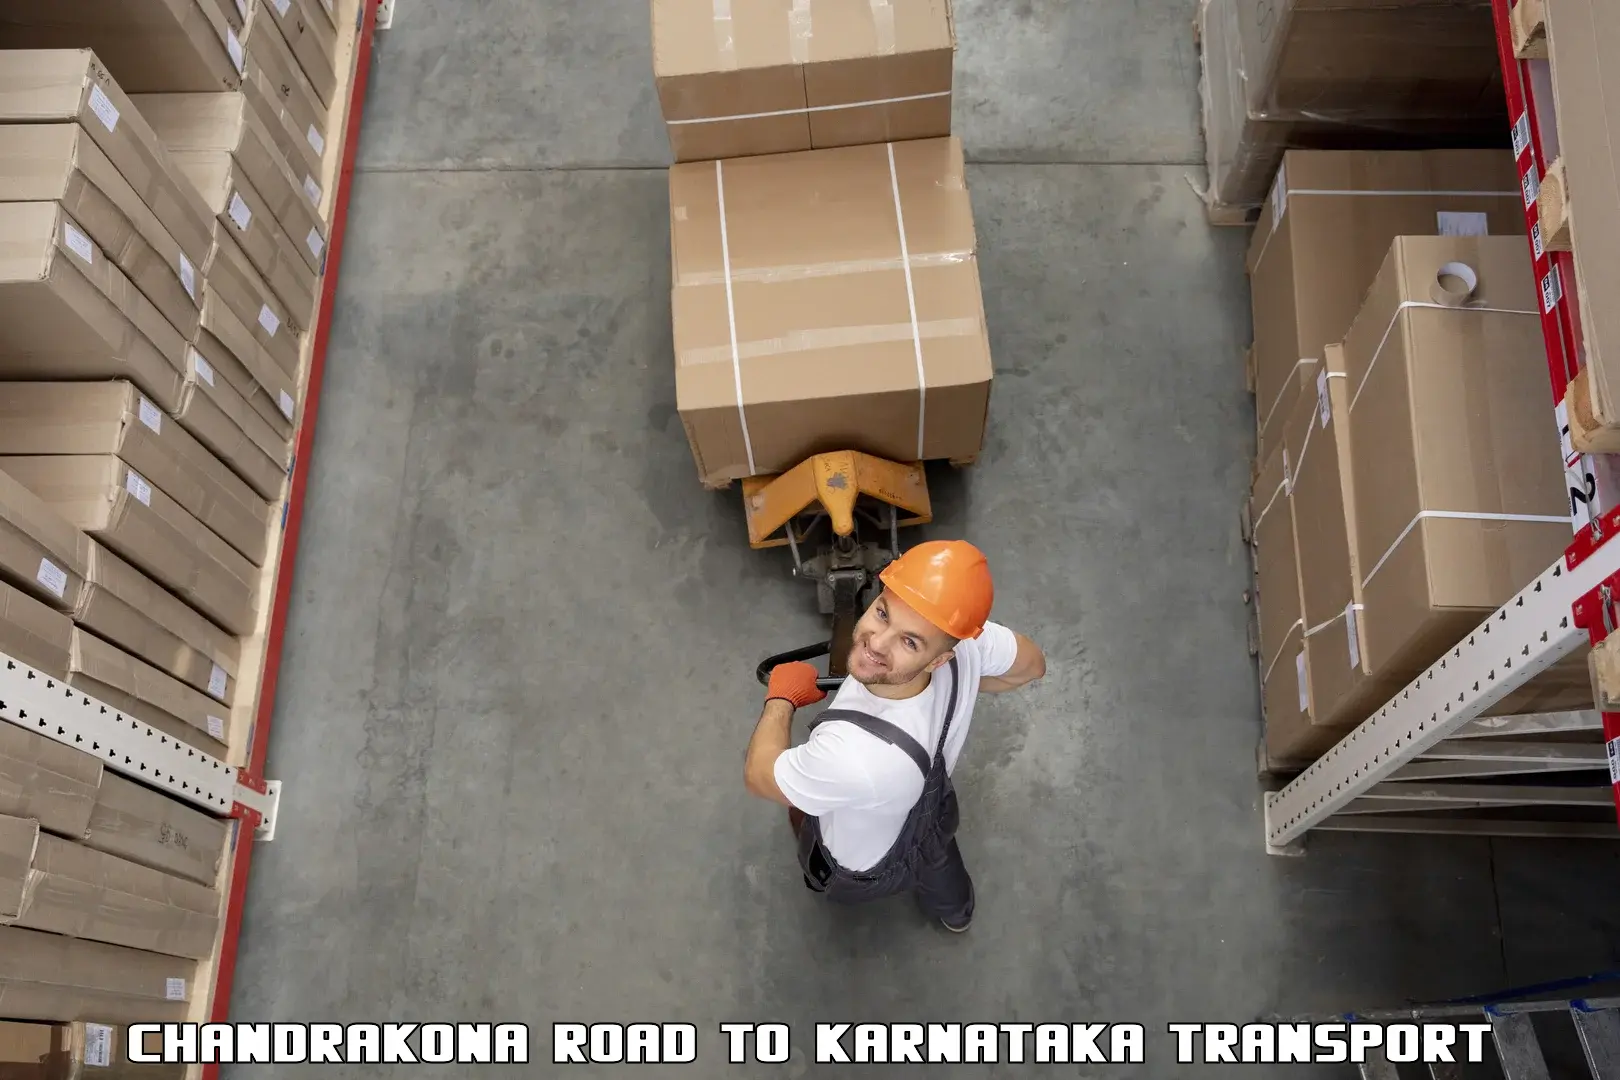 Part load transport service in India Chandrakona Road to Bangalore